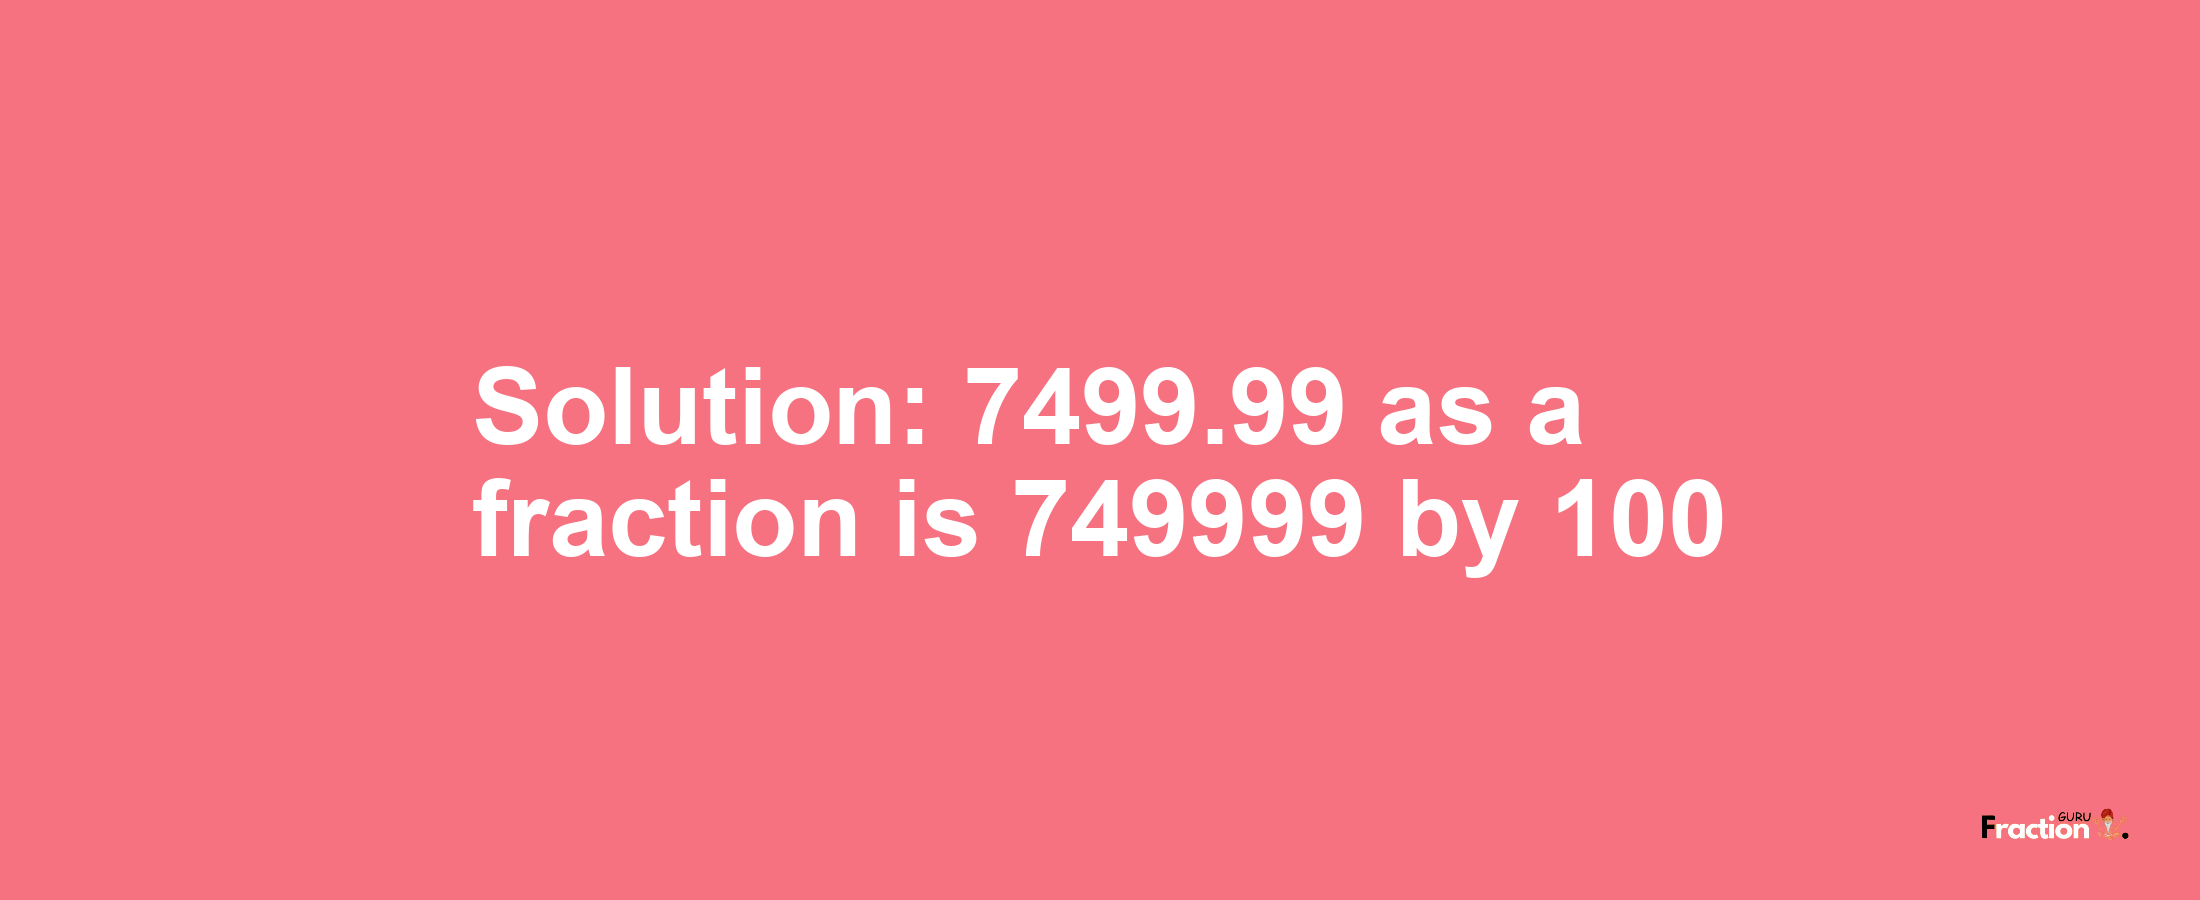 Solution:7499.99 as a fraction is 749999/100